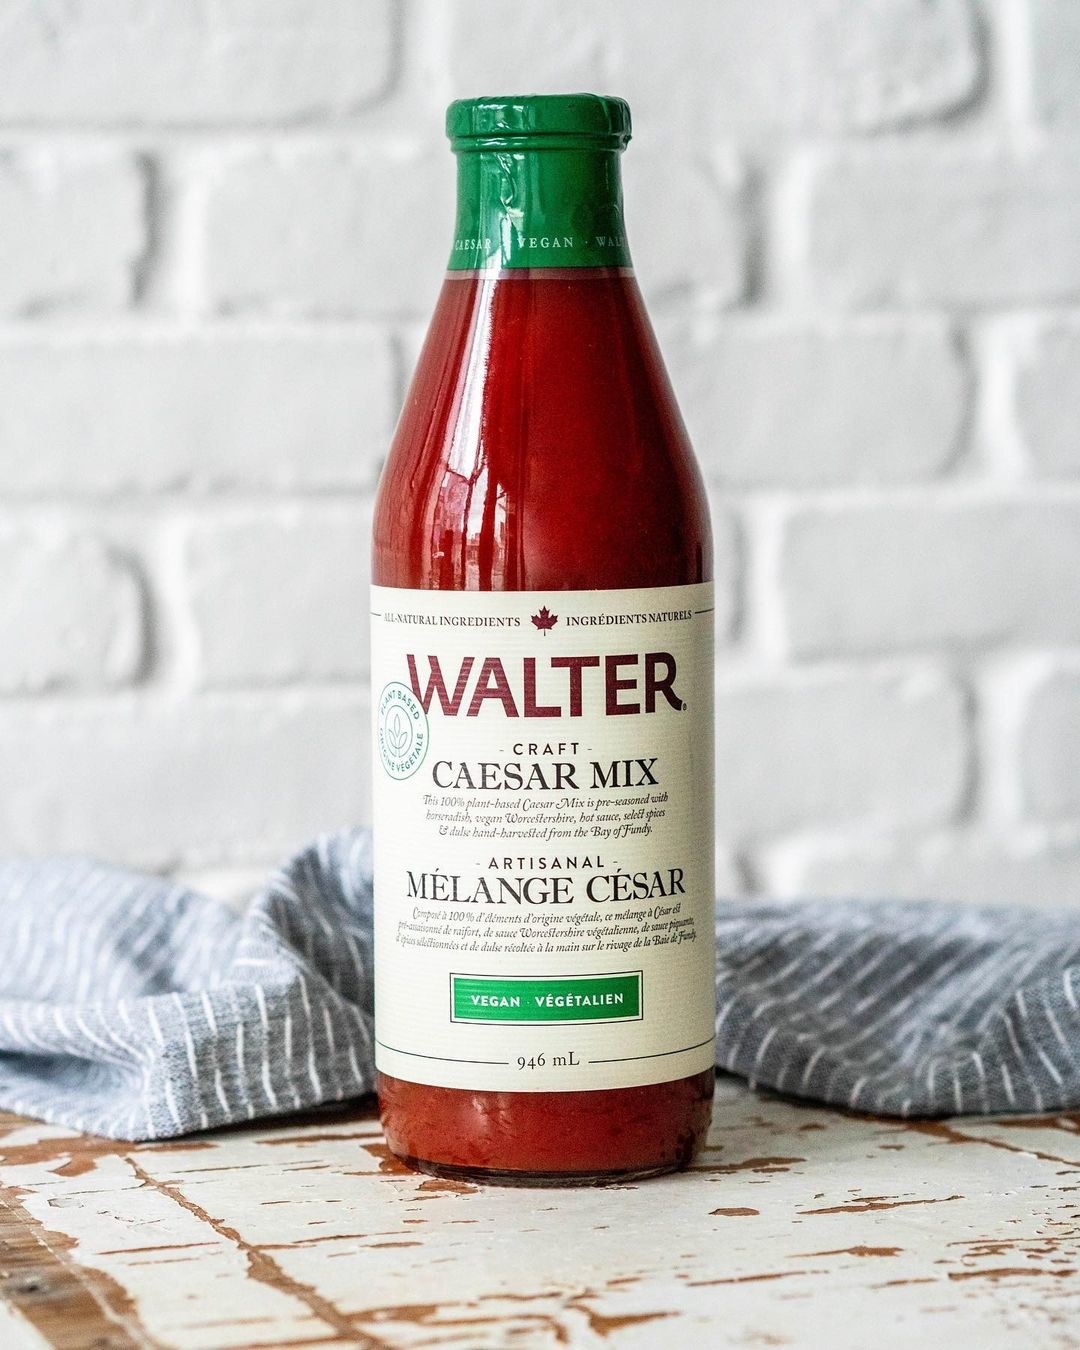 A bottle of vegan Caesar mix on a rustic counter